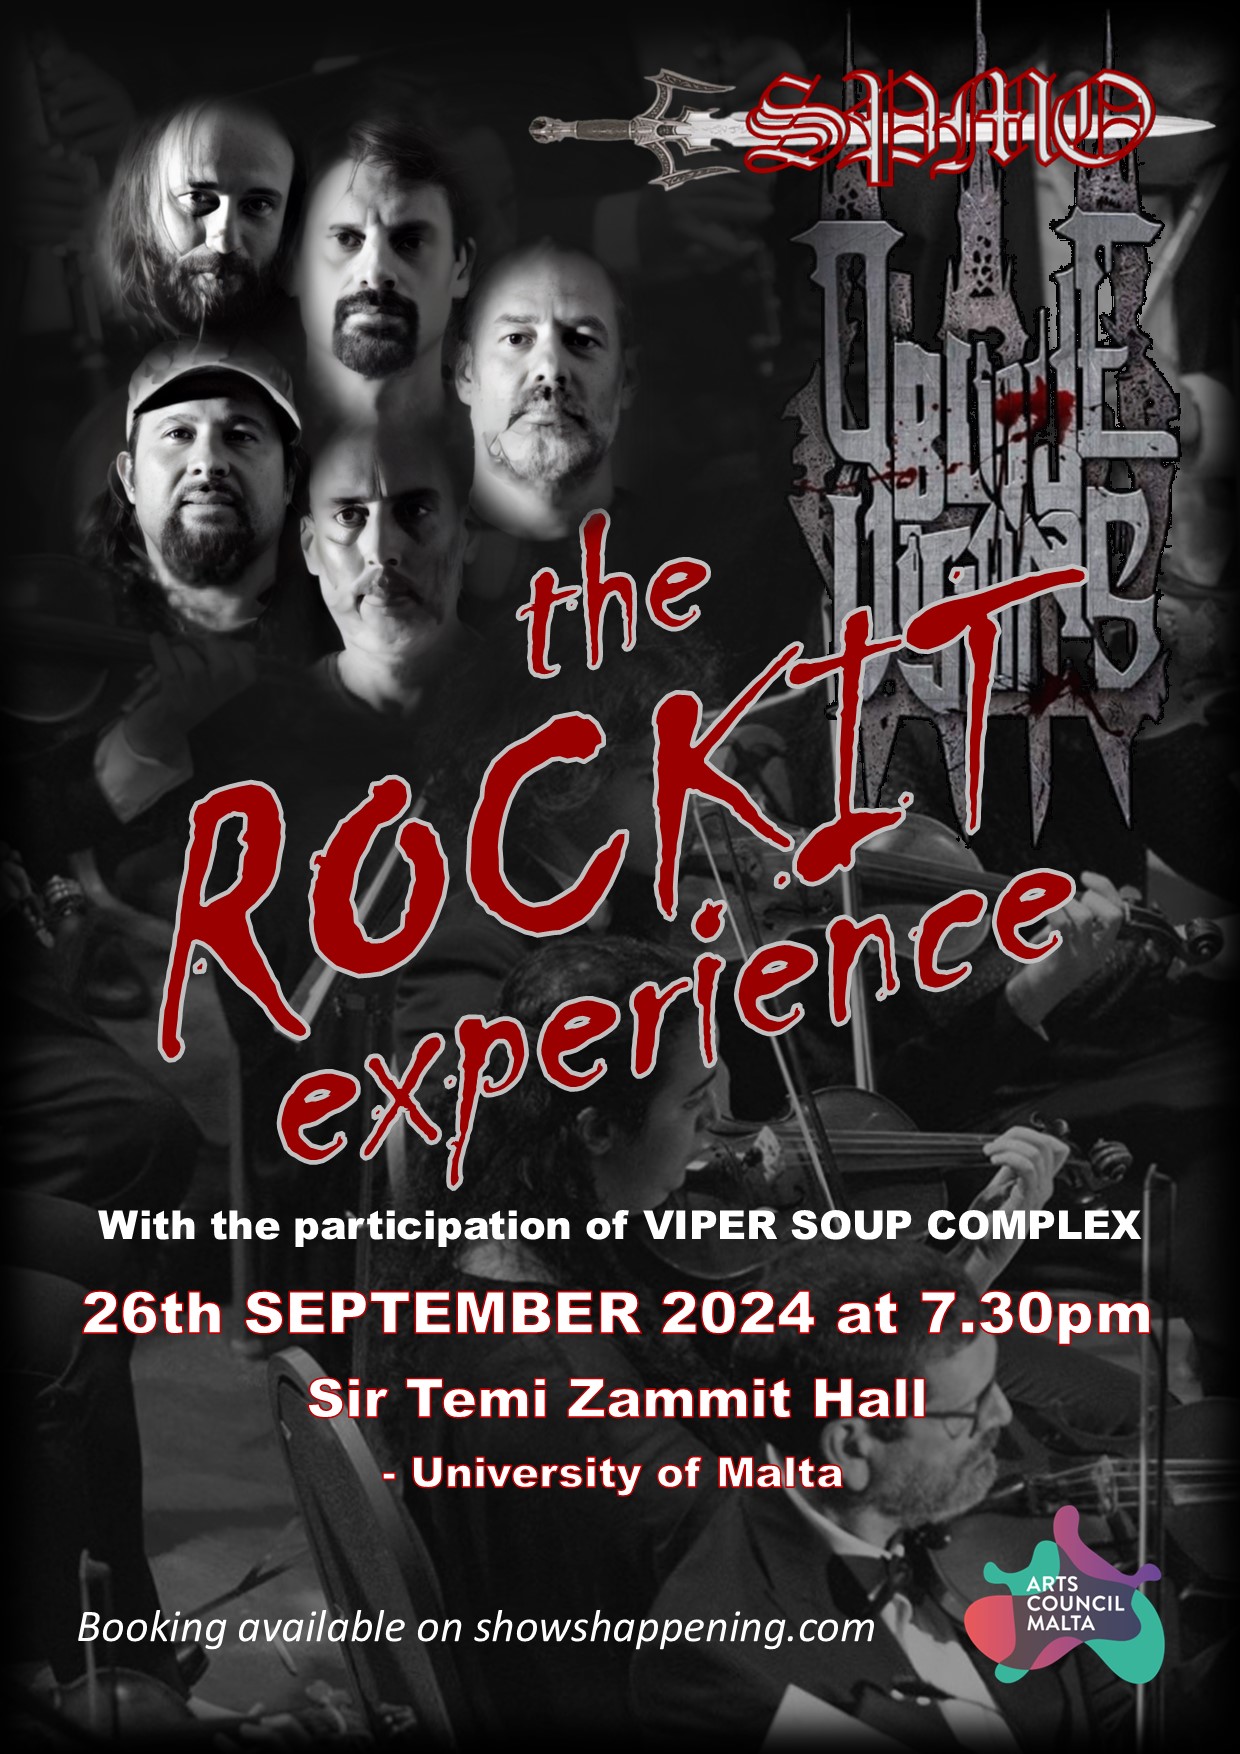 The ROCKIT Experience poster